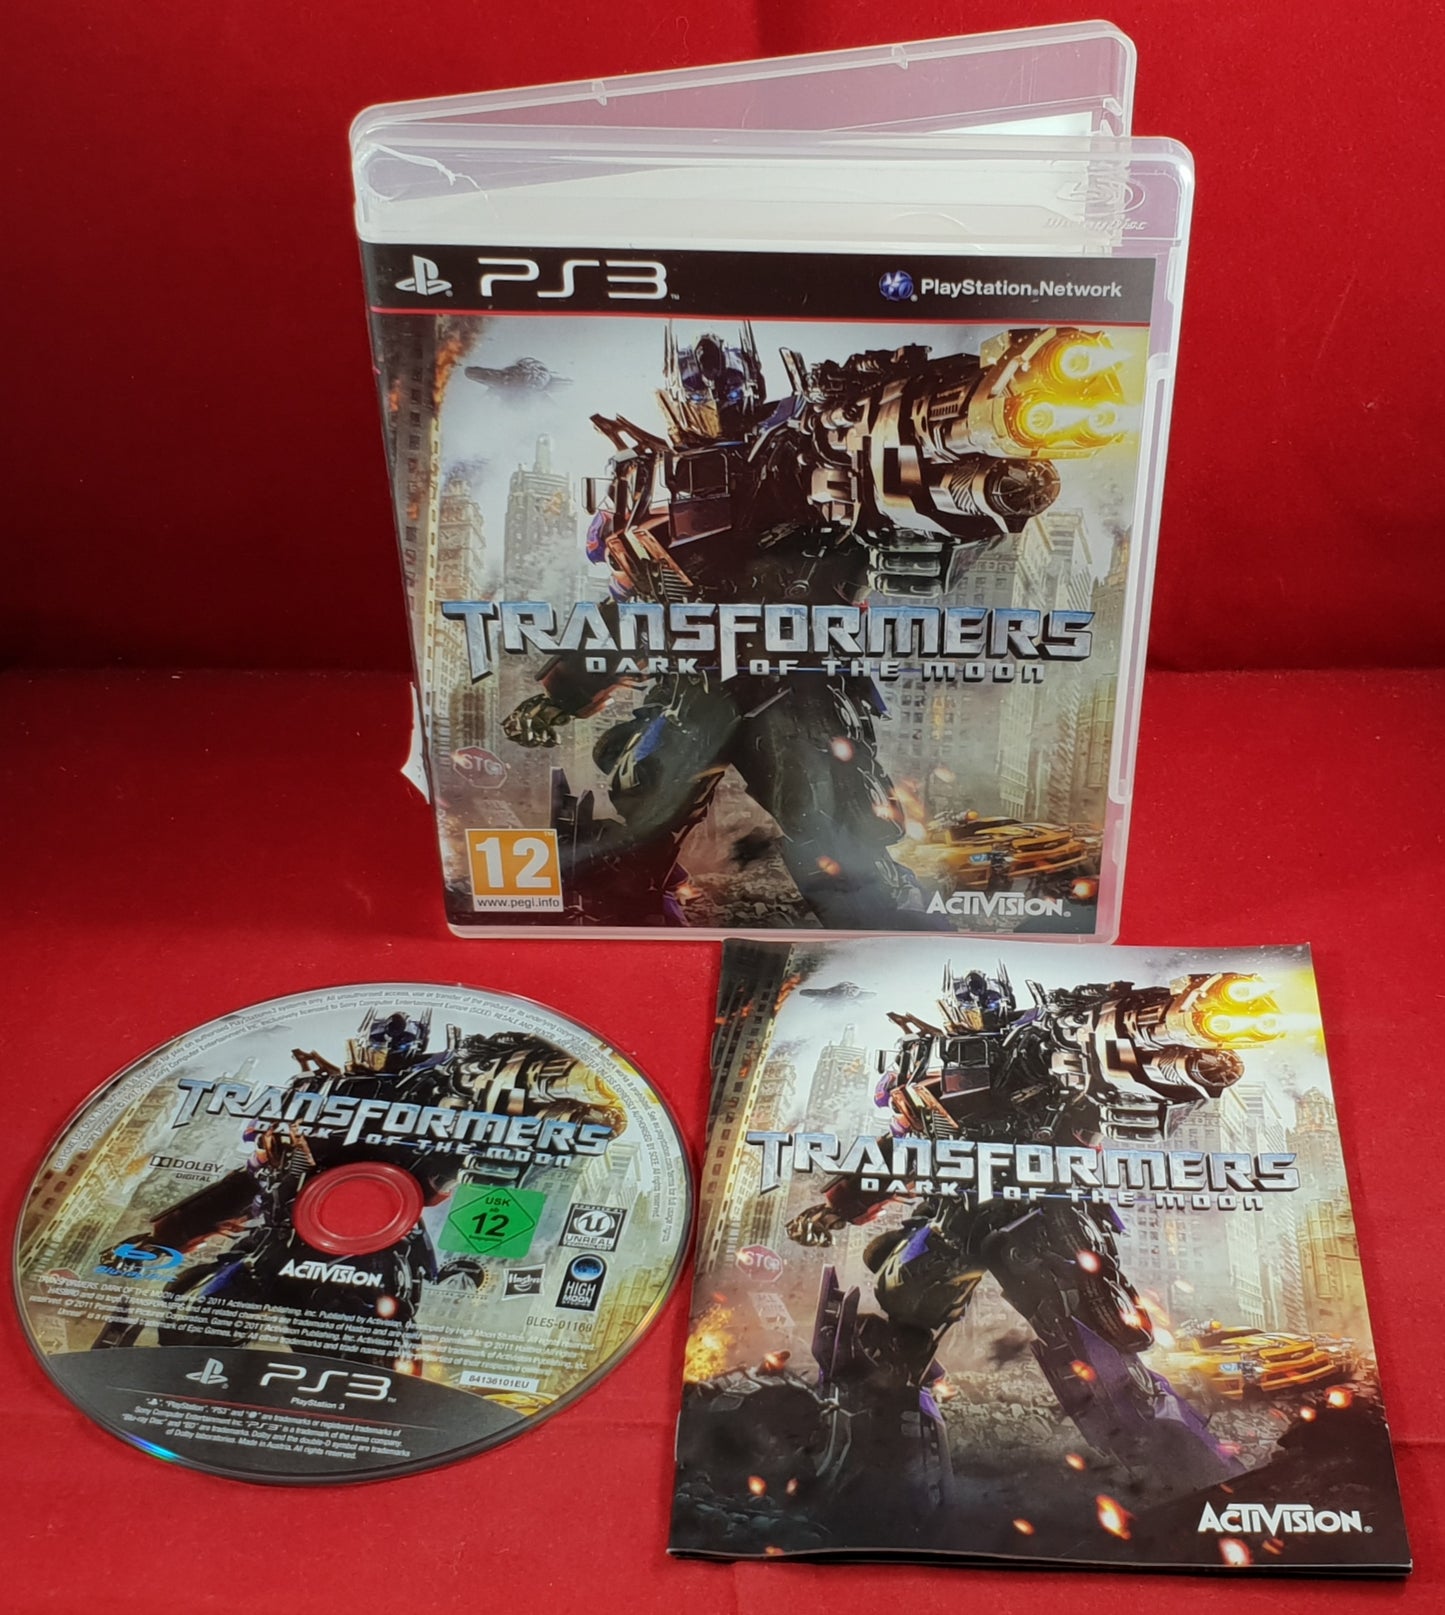 Transformers Dark of the Moon Sony Playstation 3 (PS3) Game